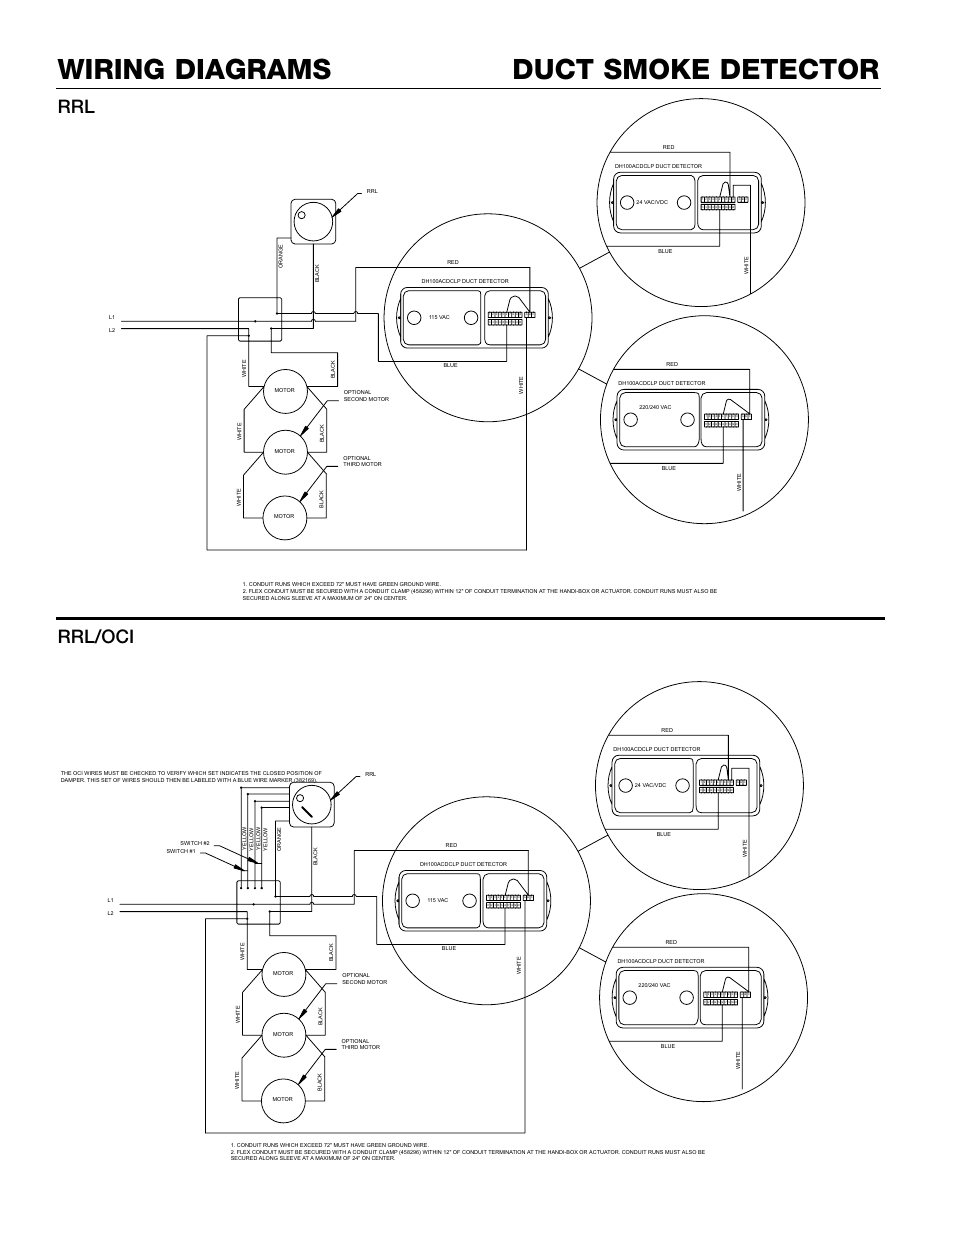 Duct smoke detector wiring diagrams, Rrl rrl/oci | Greenheck Fan DH100ACDCLP User Manual | Page 5 / 8